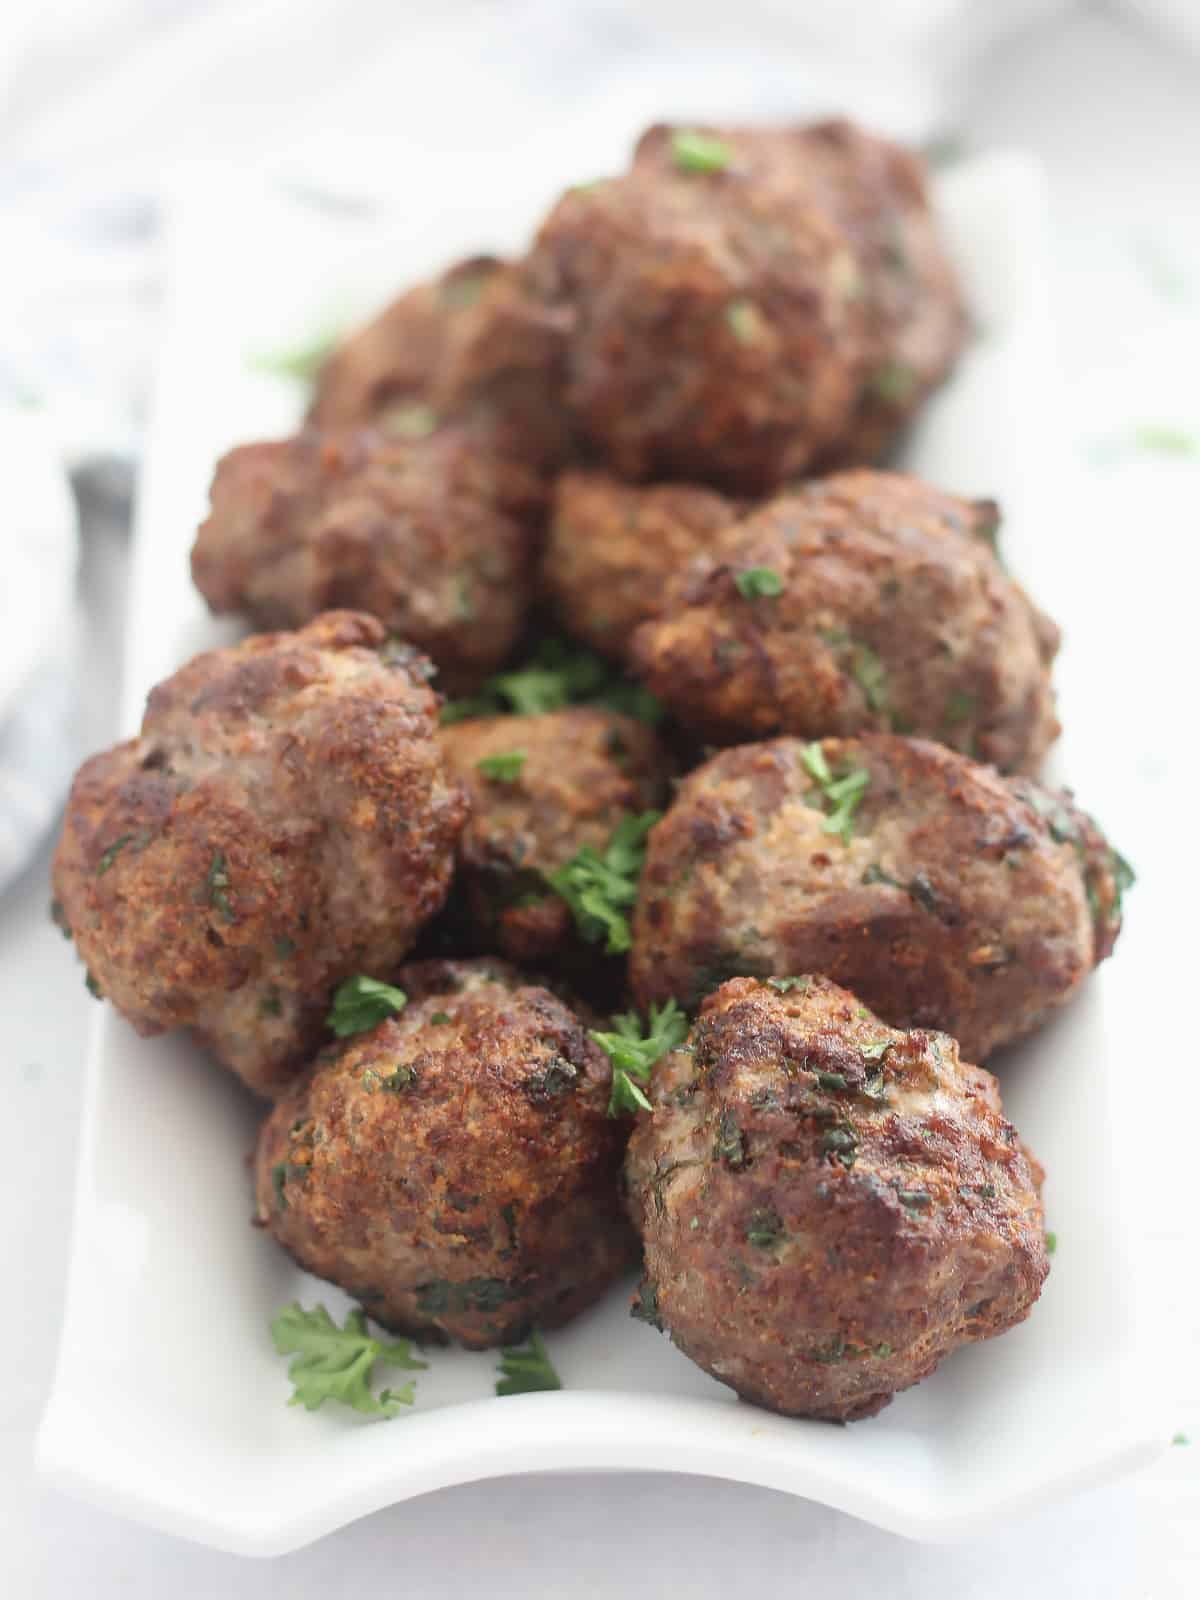 Air fried lamb meatballs on a white plate garnished with fresh parsley.